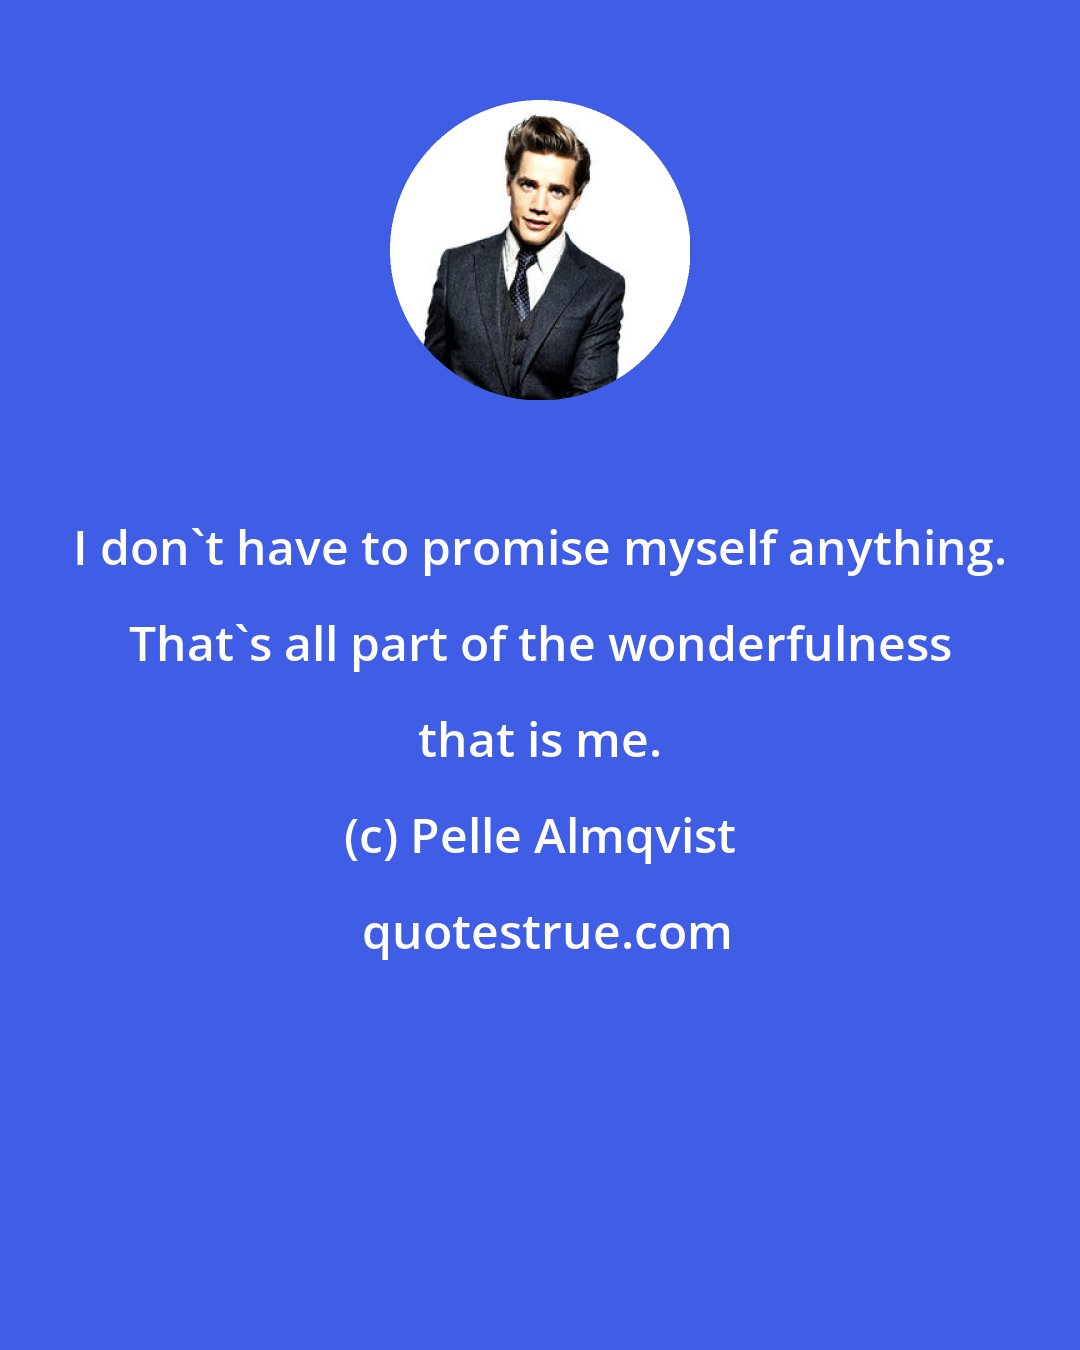 Pelle Almqvist: I don't have to promise myself anything. That's all part of the wonderfulness that is me.